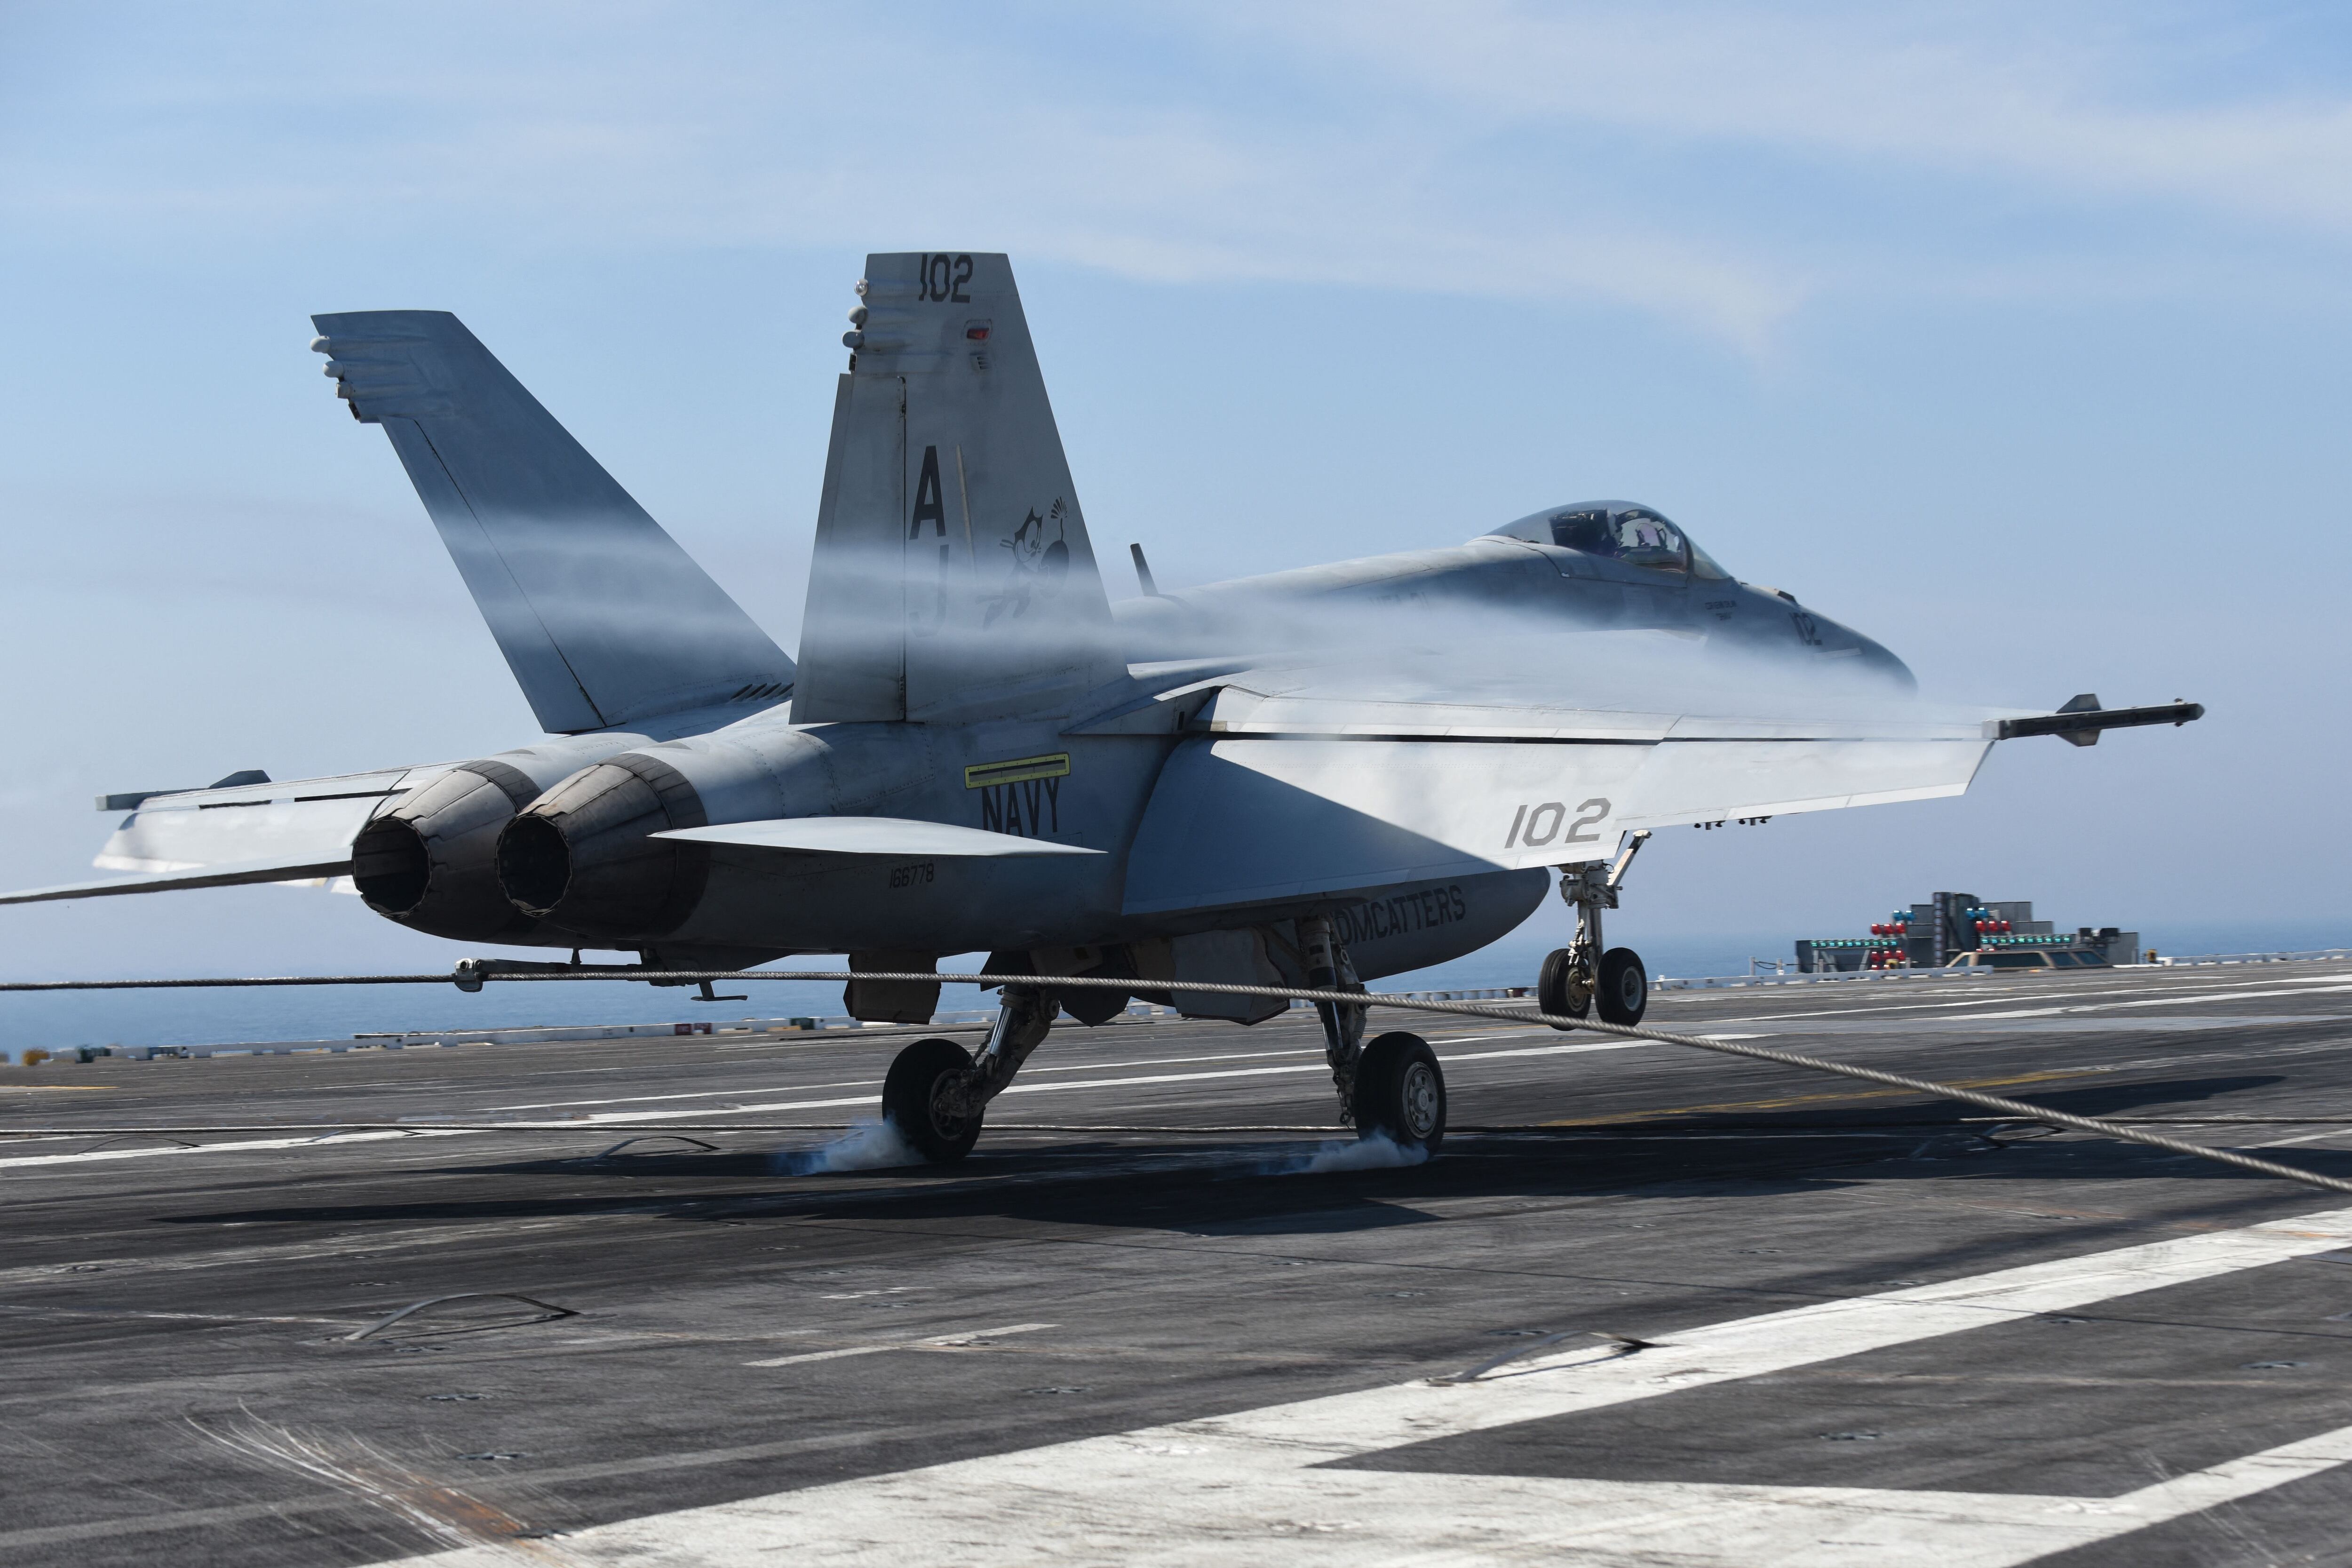 An F-18 Hornet aircraft lands on the deck of the aircraft carrier USS George HW Bush on May 11, 2018, in the Atlantic Ocean.  (Photo by Eric BARADAT/AFP).